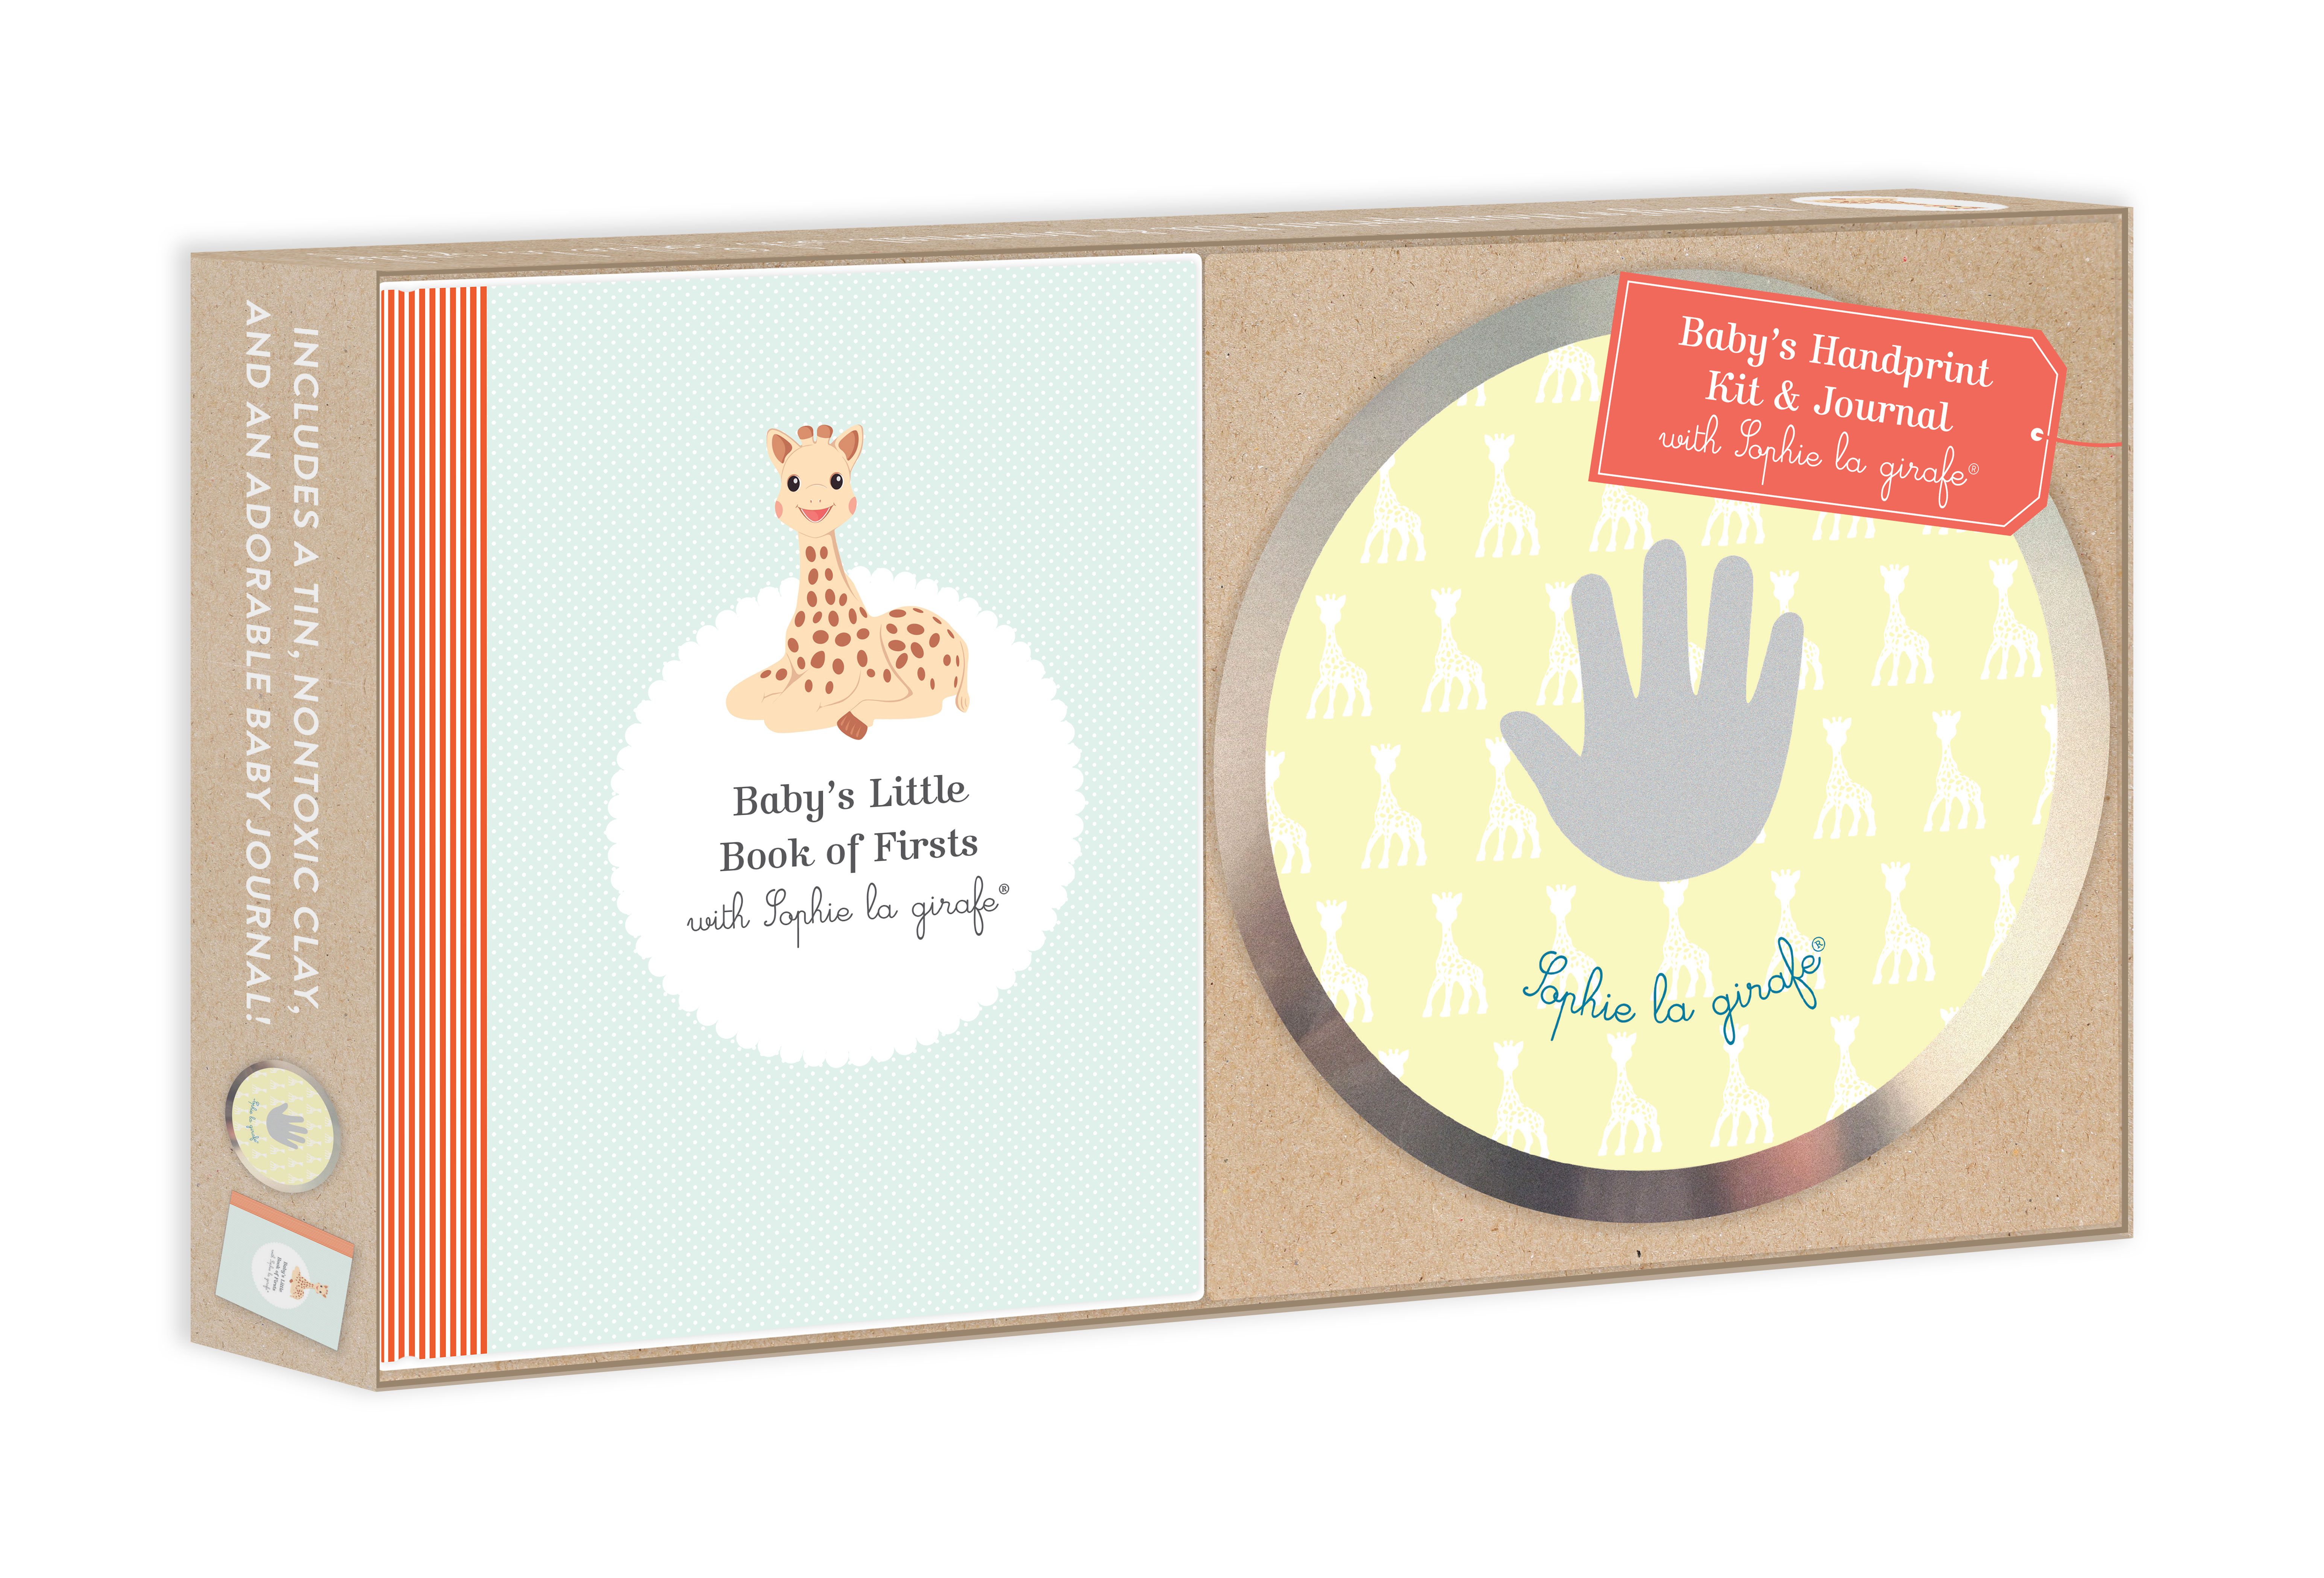 My Pregnancy Journal with Sophie la girafe®, Second Edition